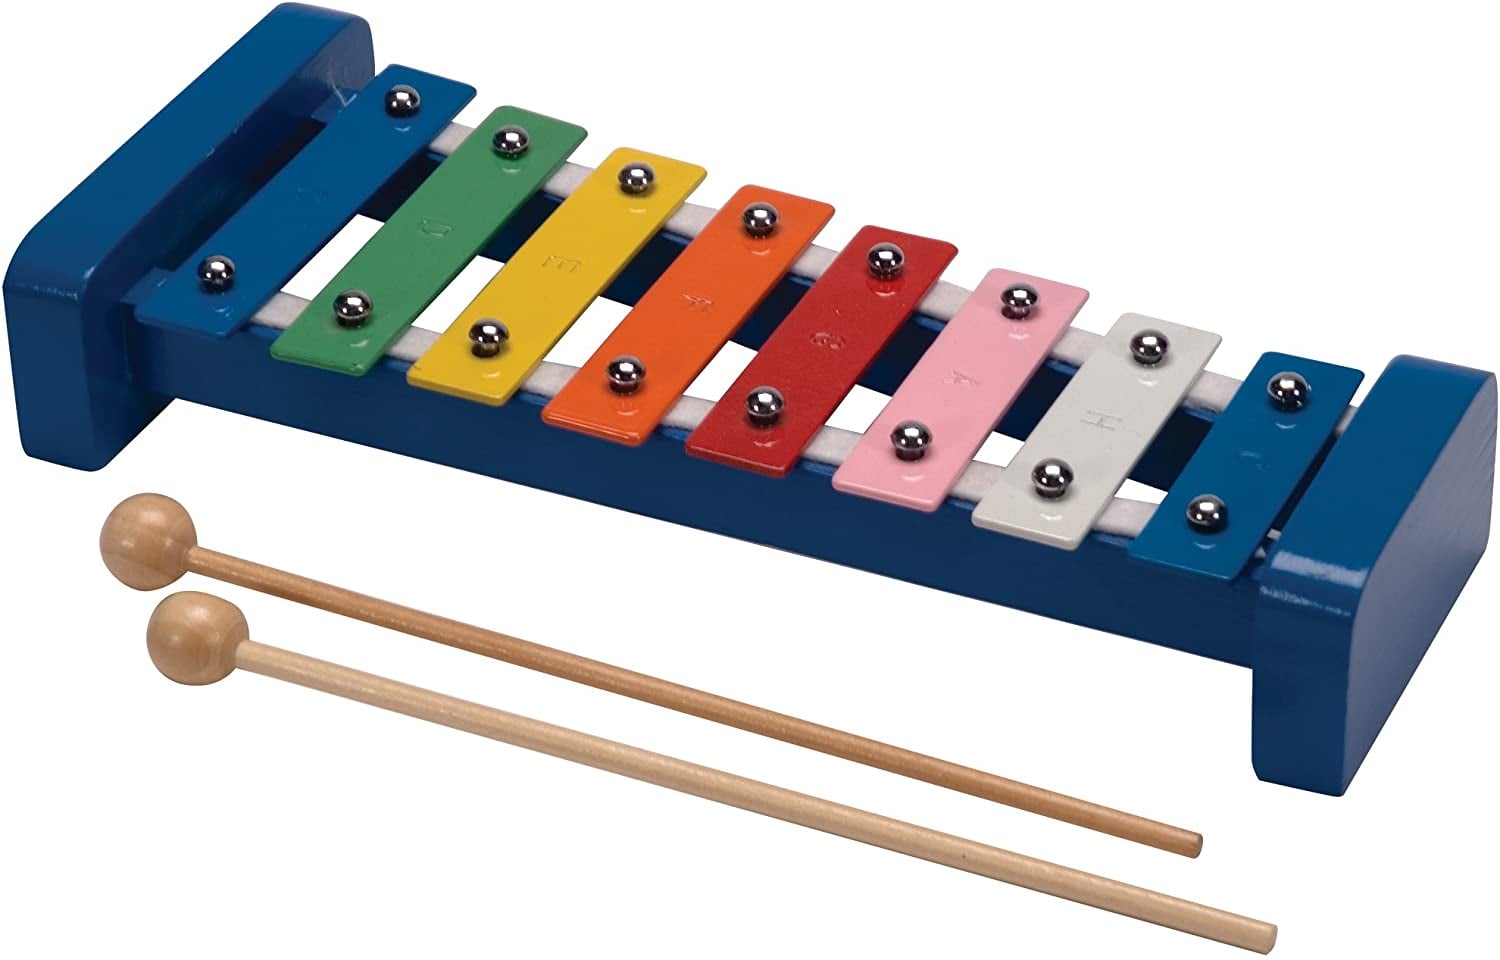 xylophone for 1 year old